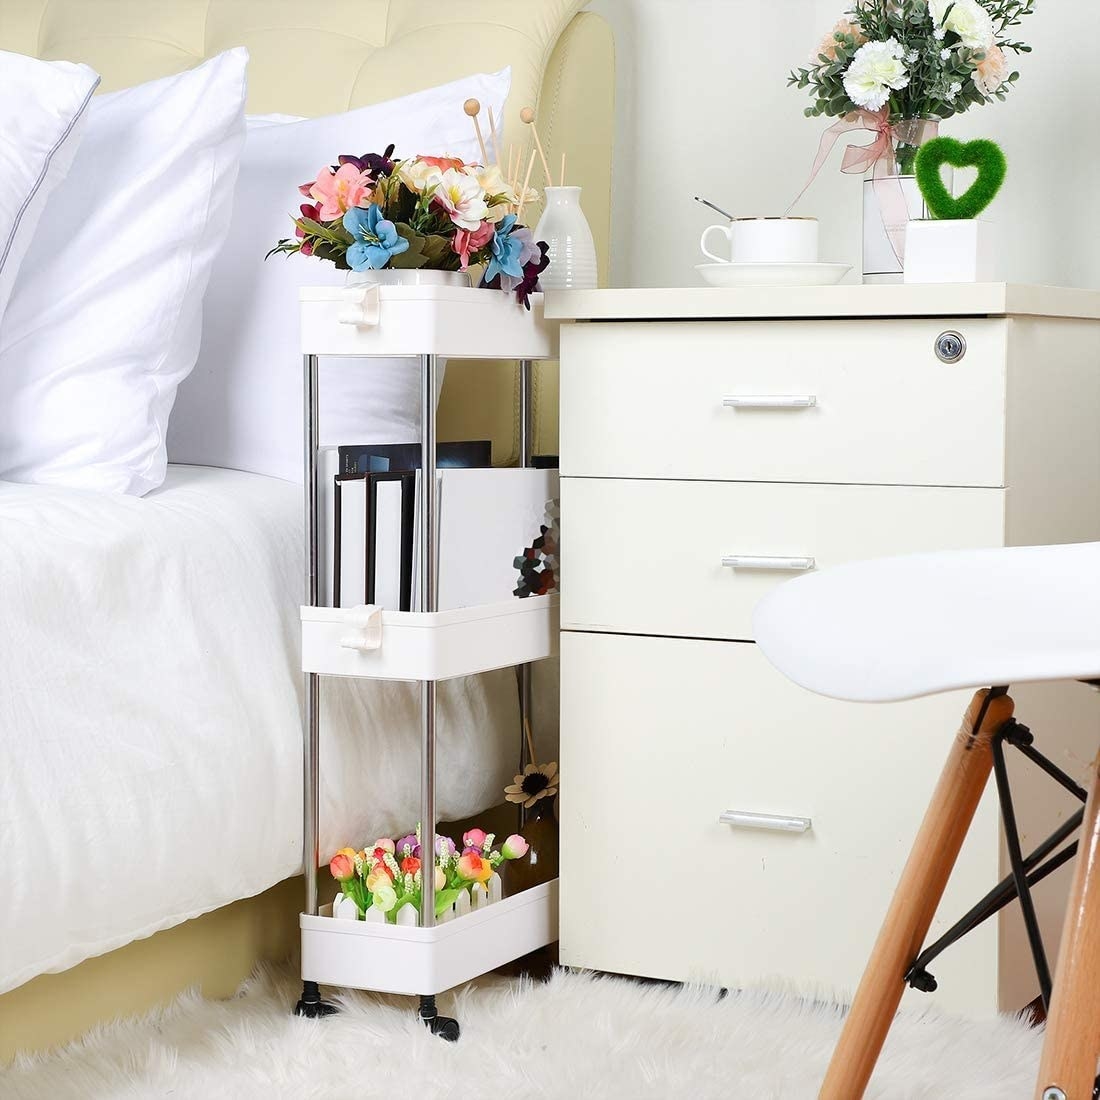 Three-tiered storage cart placed between bed and bedside table